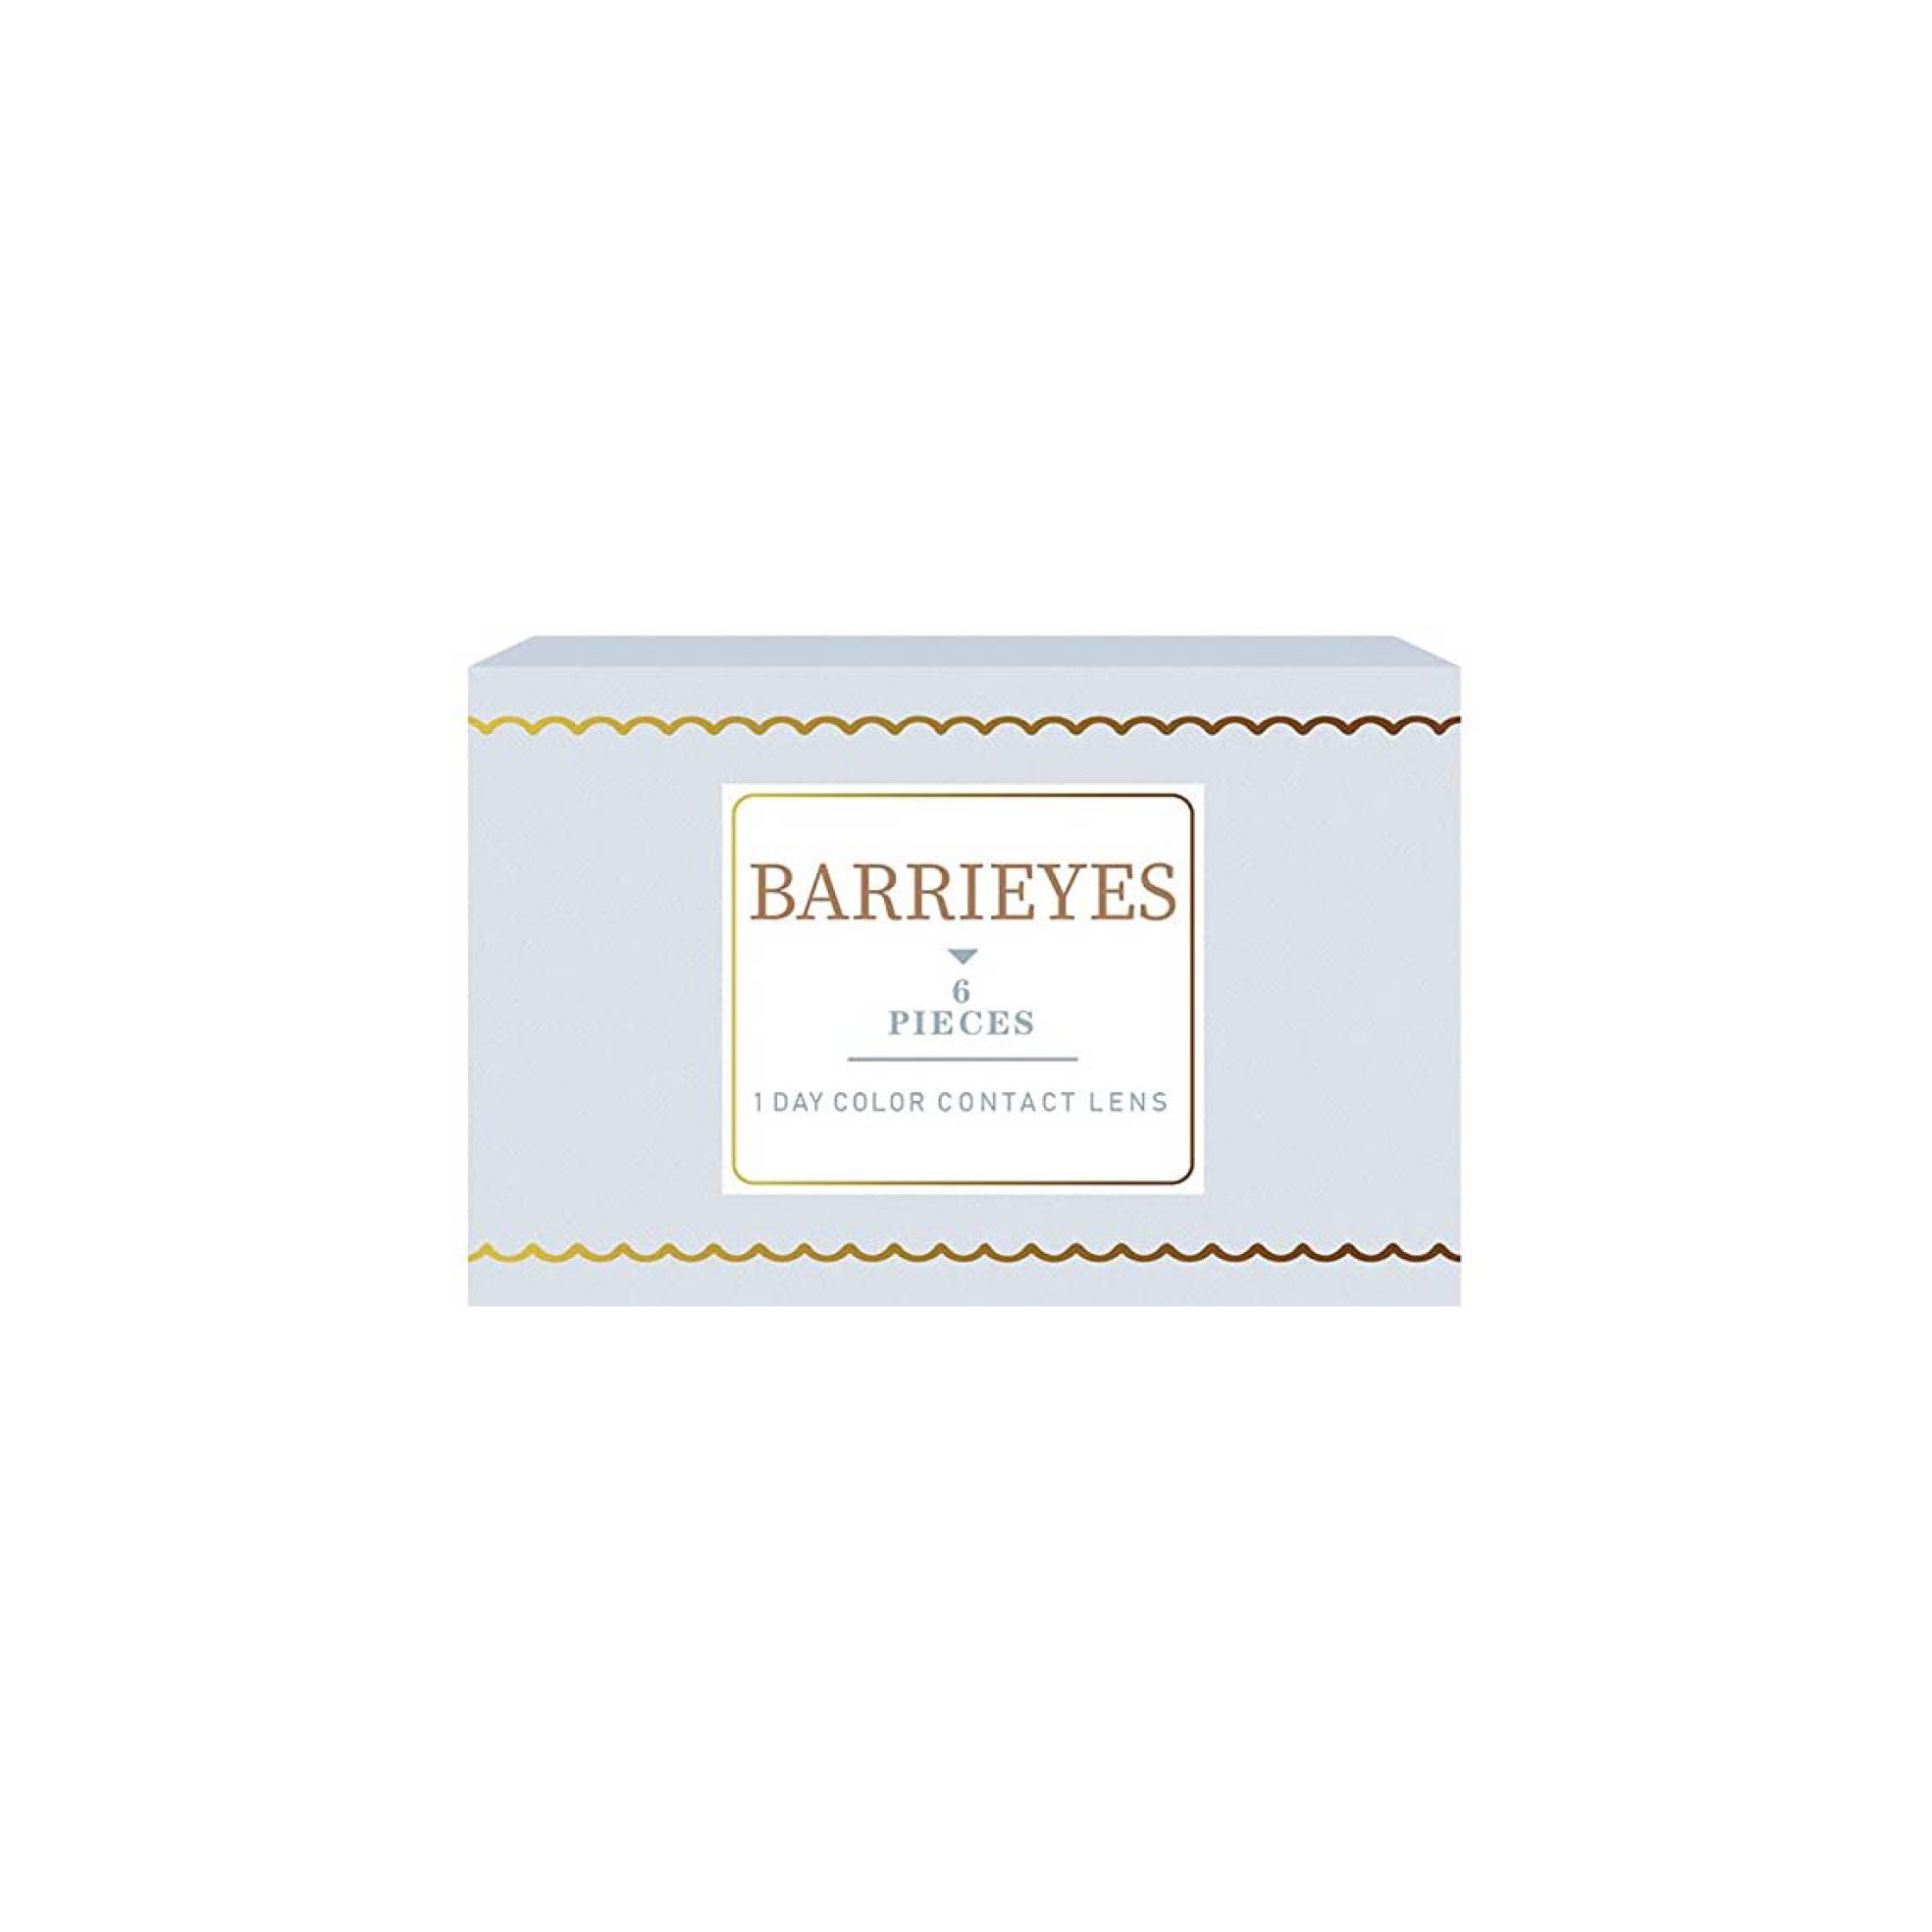 Barrieyes 1-Month color contact lens #Dawn brown月抛美瞳黎明棕｜2 Pcs